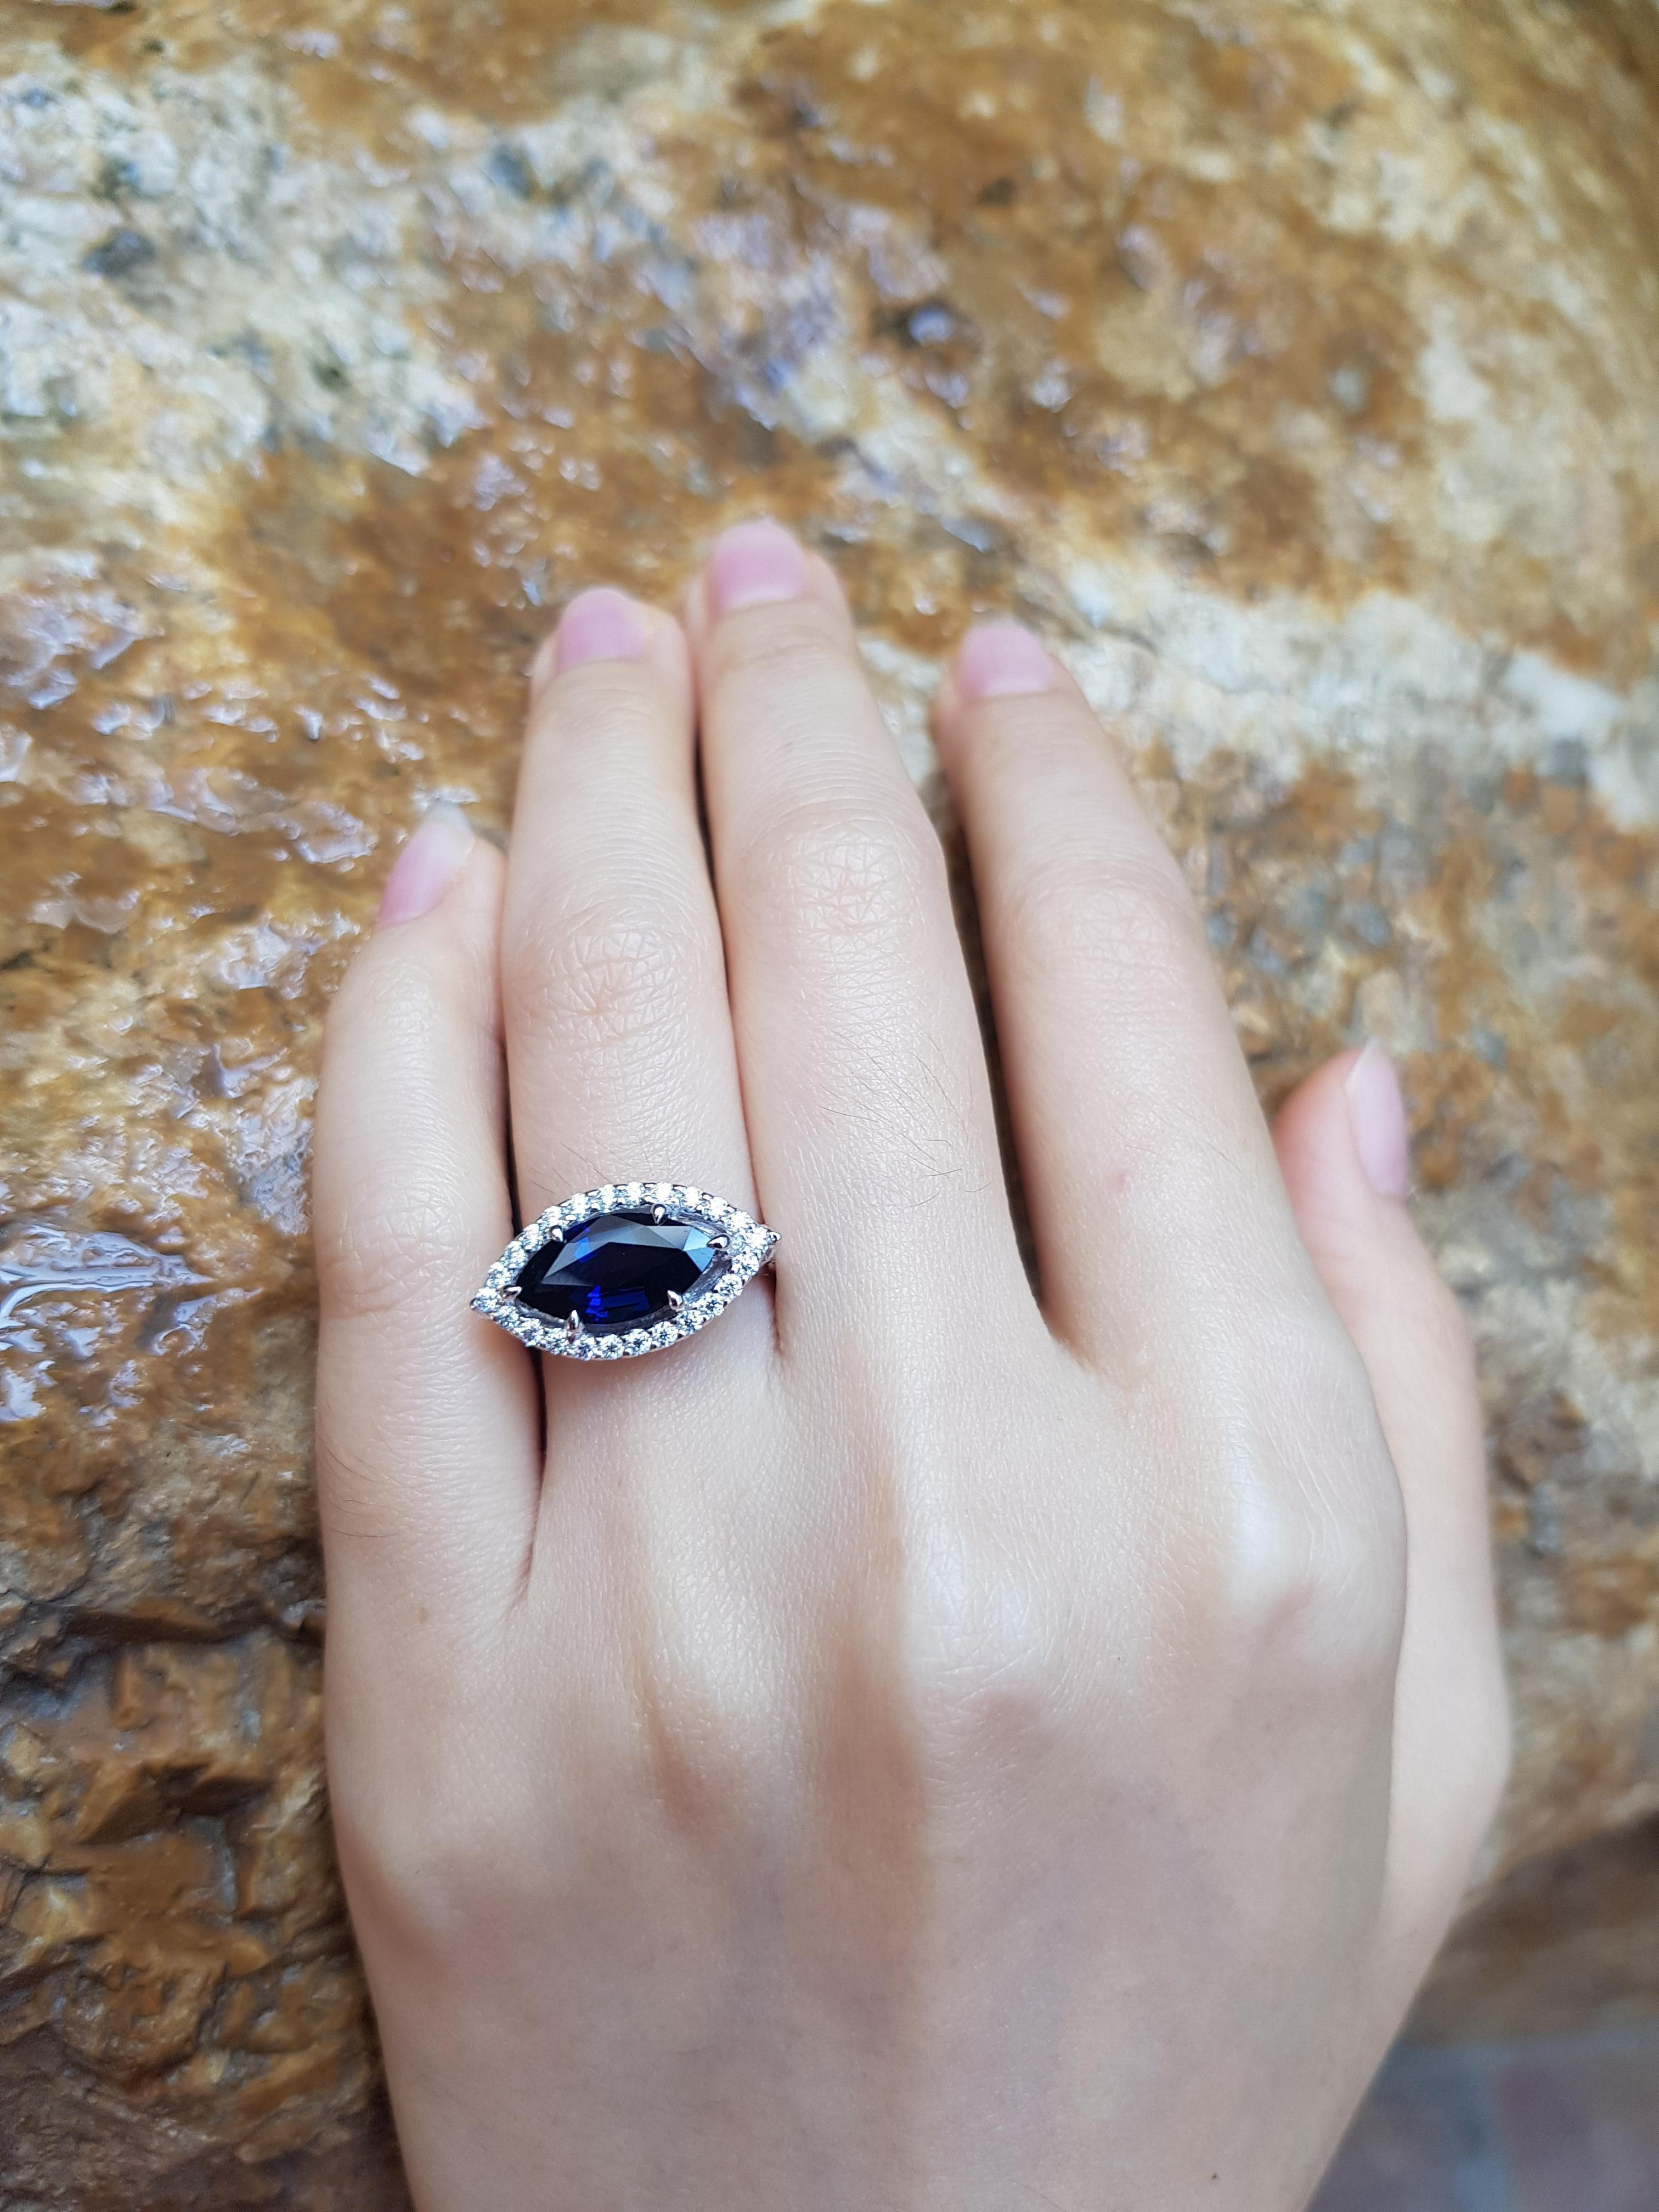 Blue Sapphire 2.62 carats with Diamond 0.70 carat Ring set in 18 Karat White Gold Settings

Width:  2.0 cm 
Length: 1.0 cm
Ring Size: 49
Total Weight: 5.19 grams

